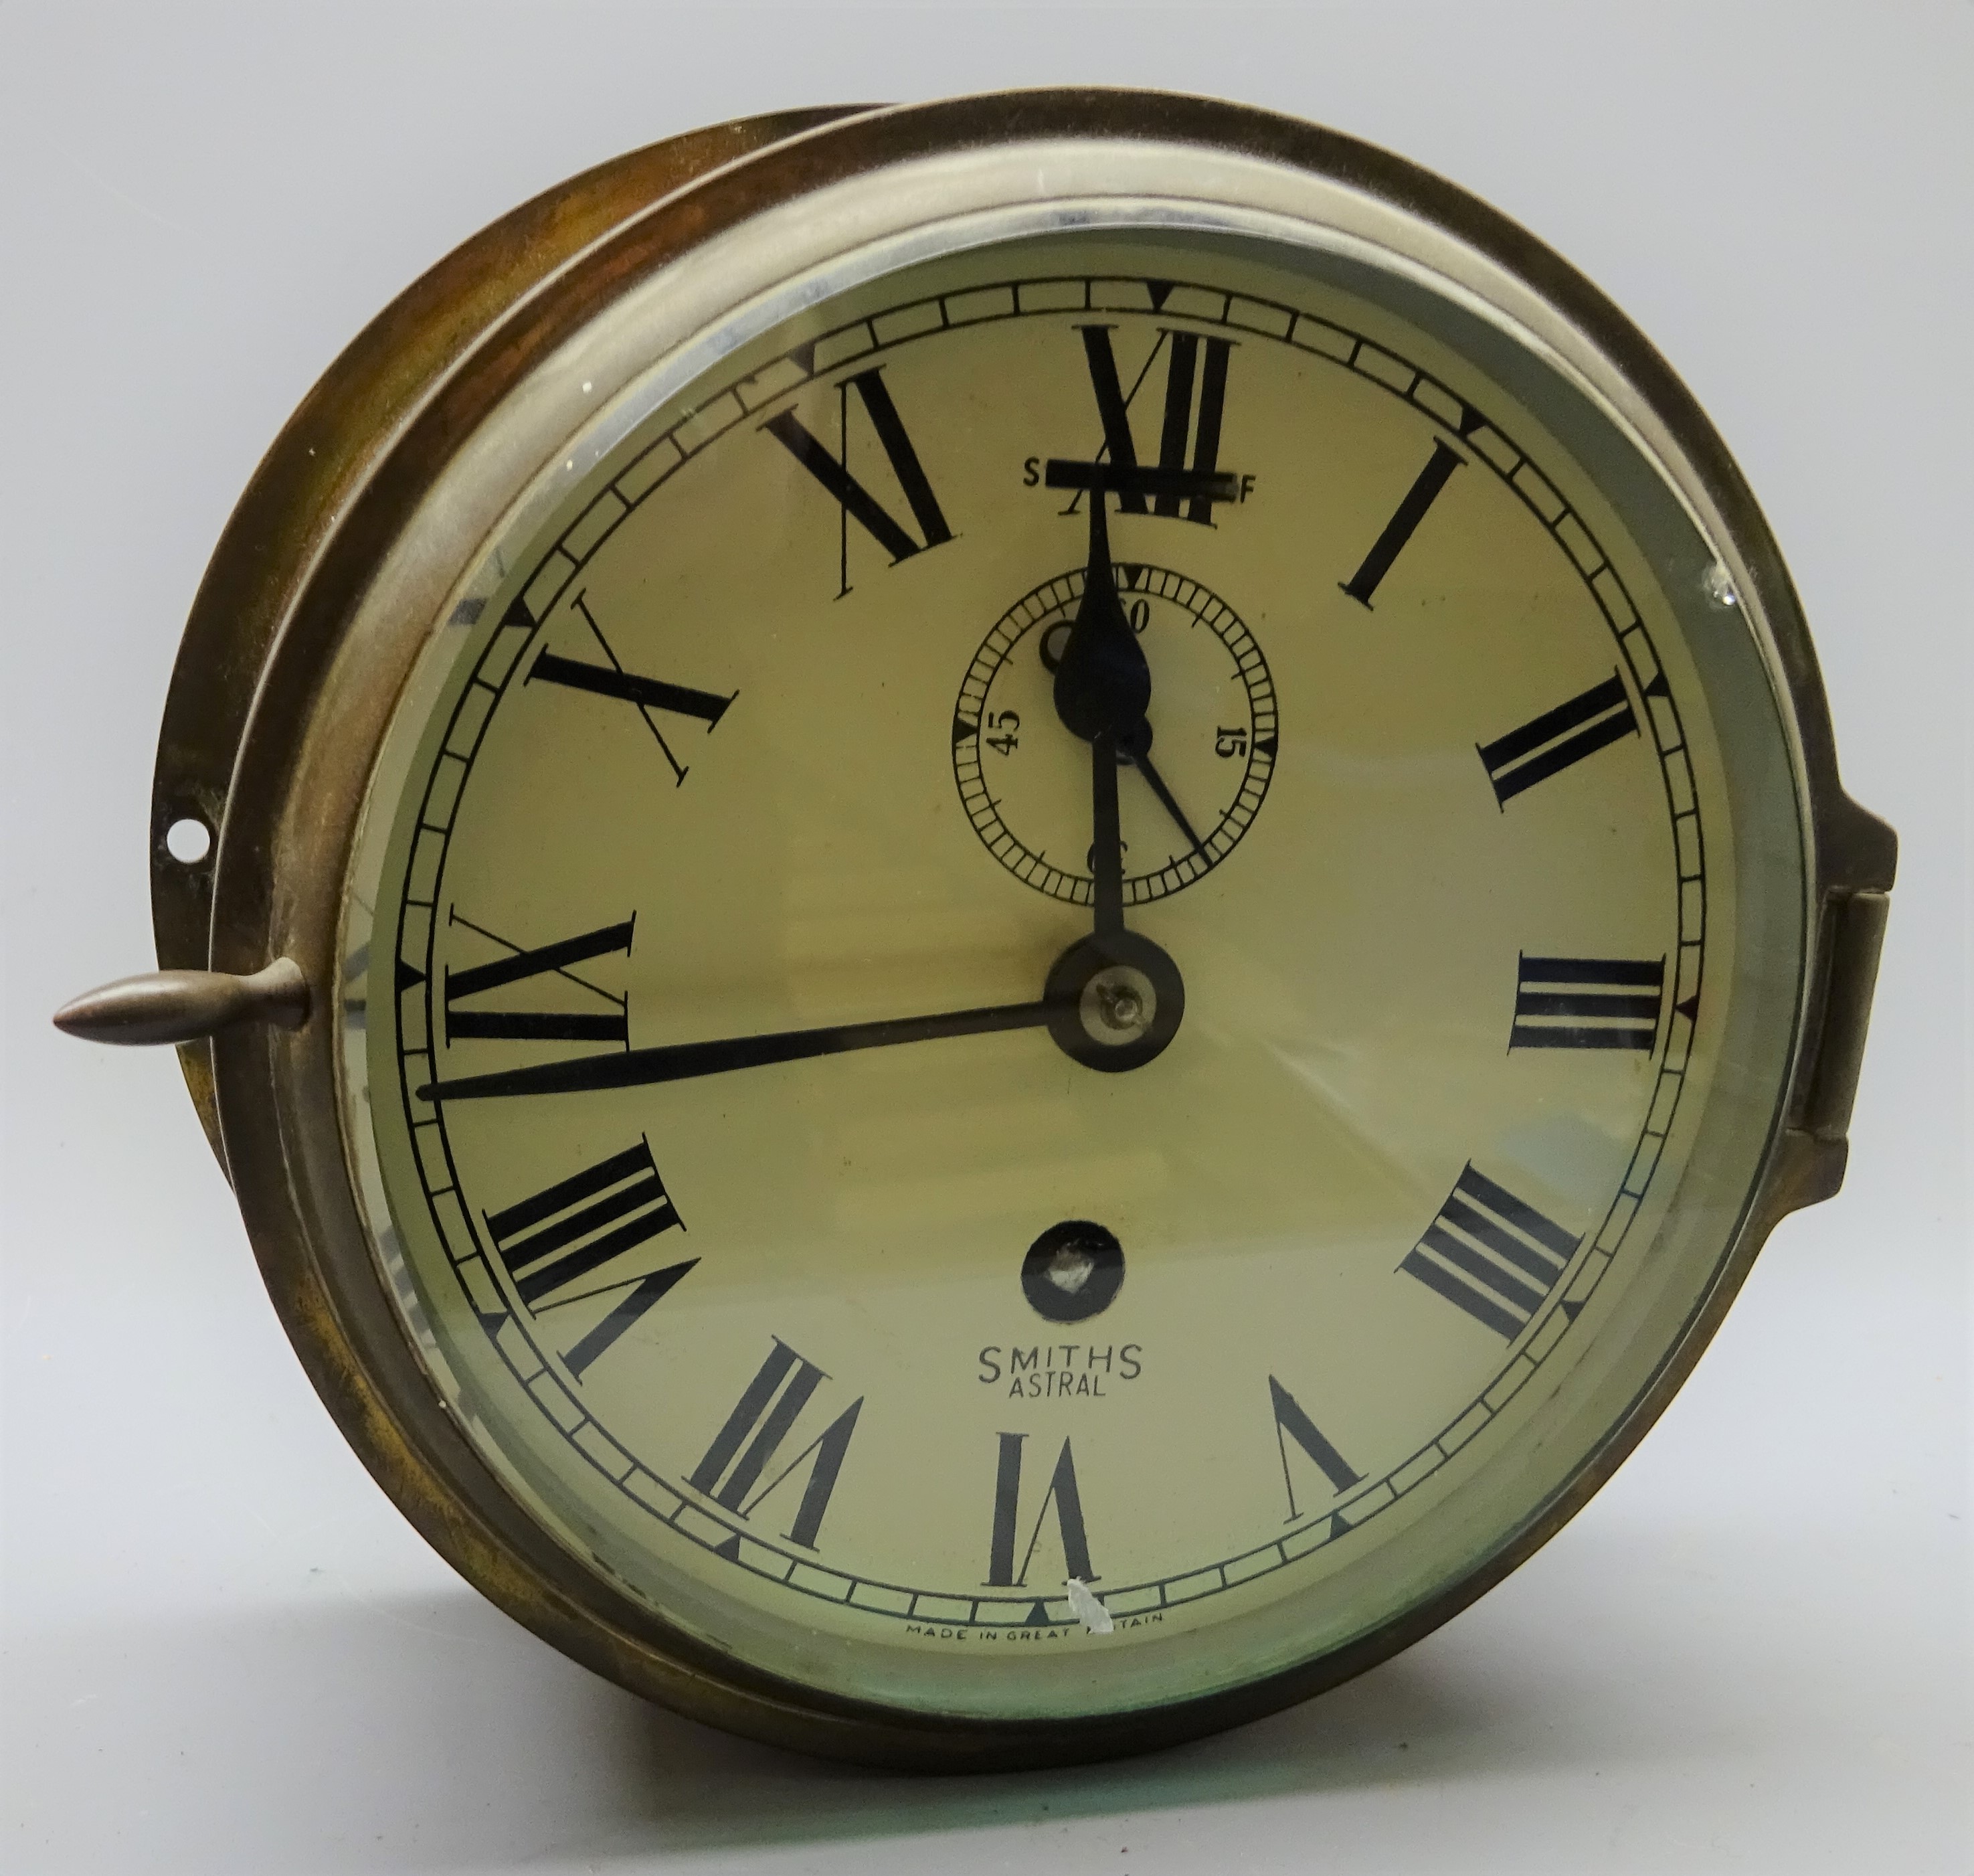 Smiths Astral ship's brass cased bulkhead clock, the white dial with Roman numerals,